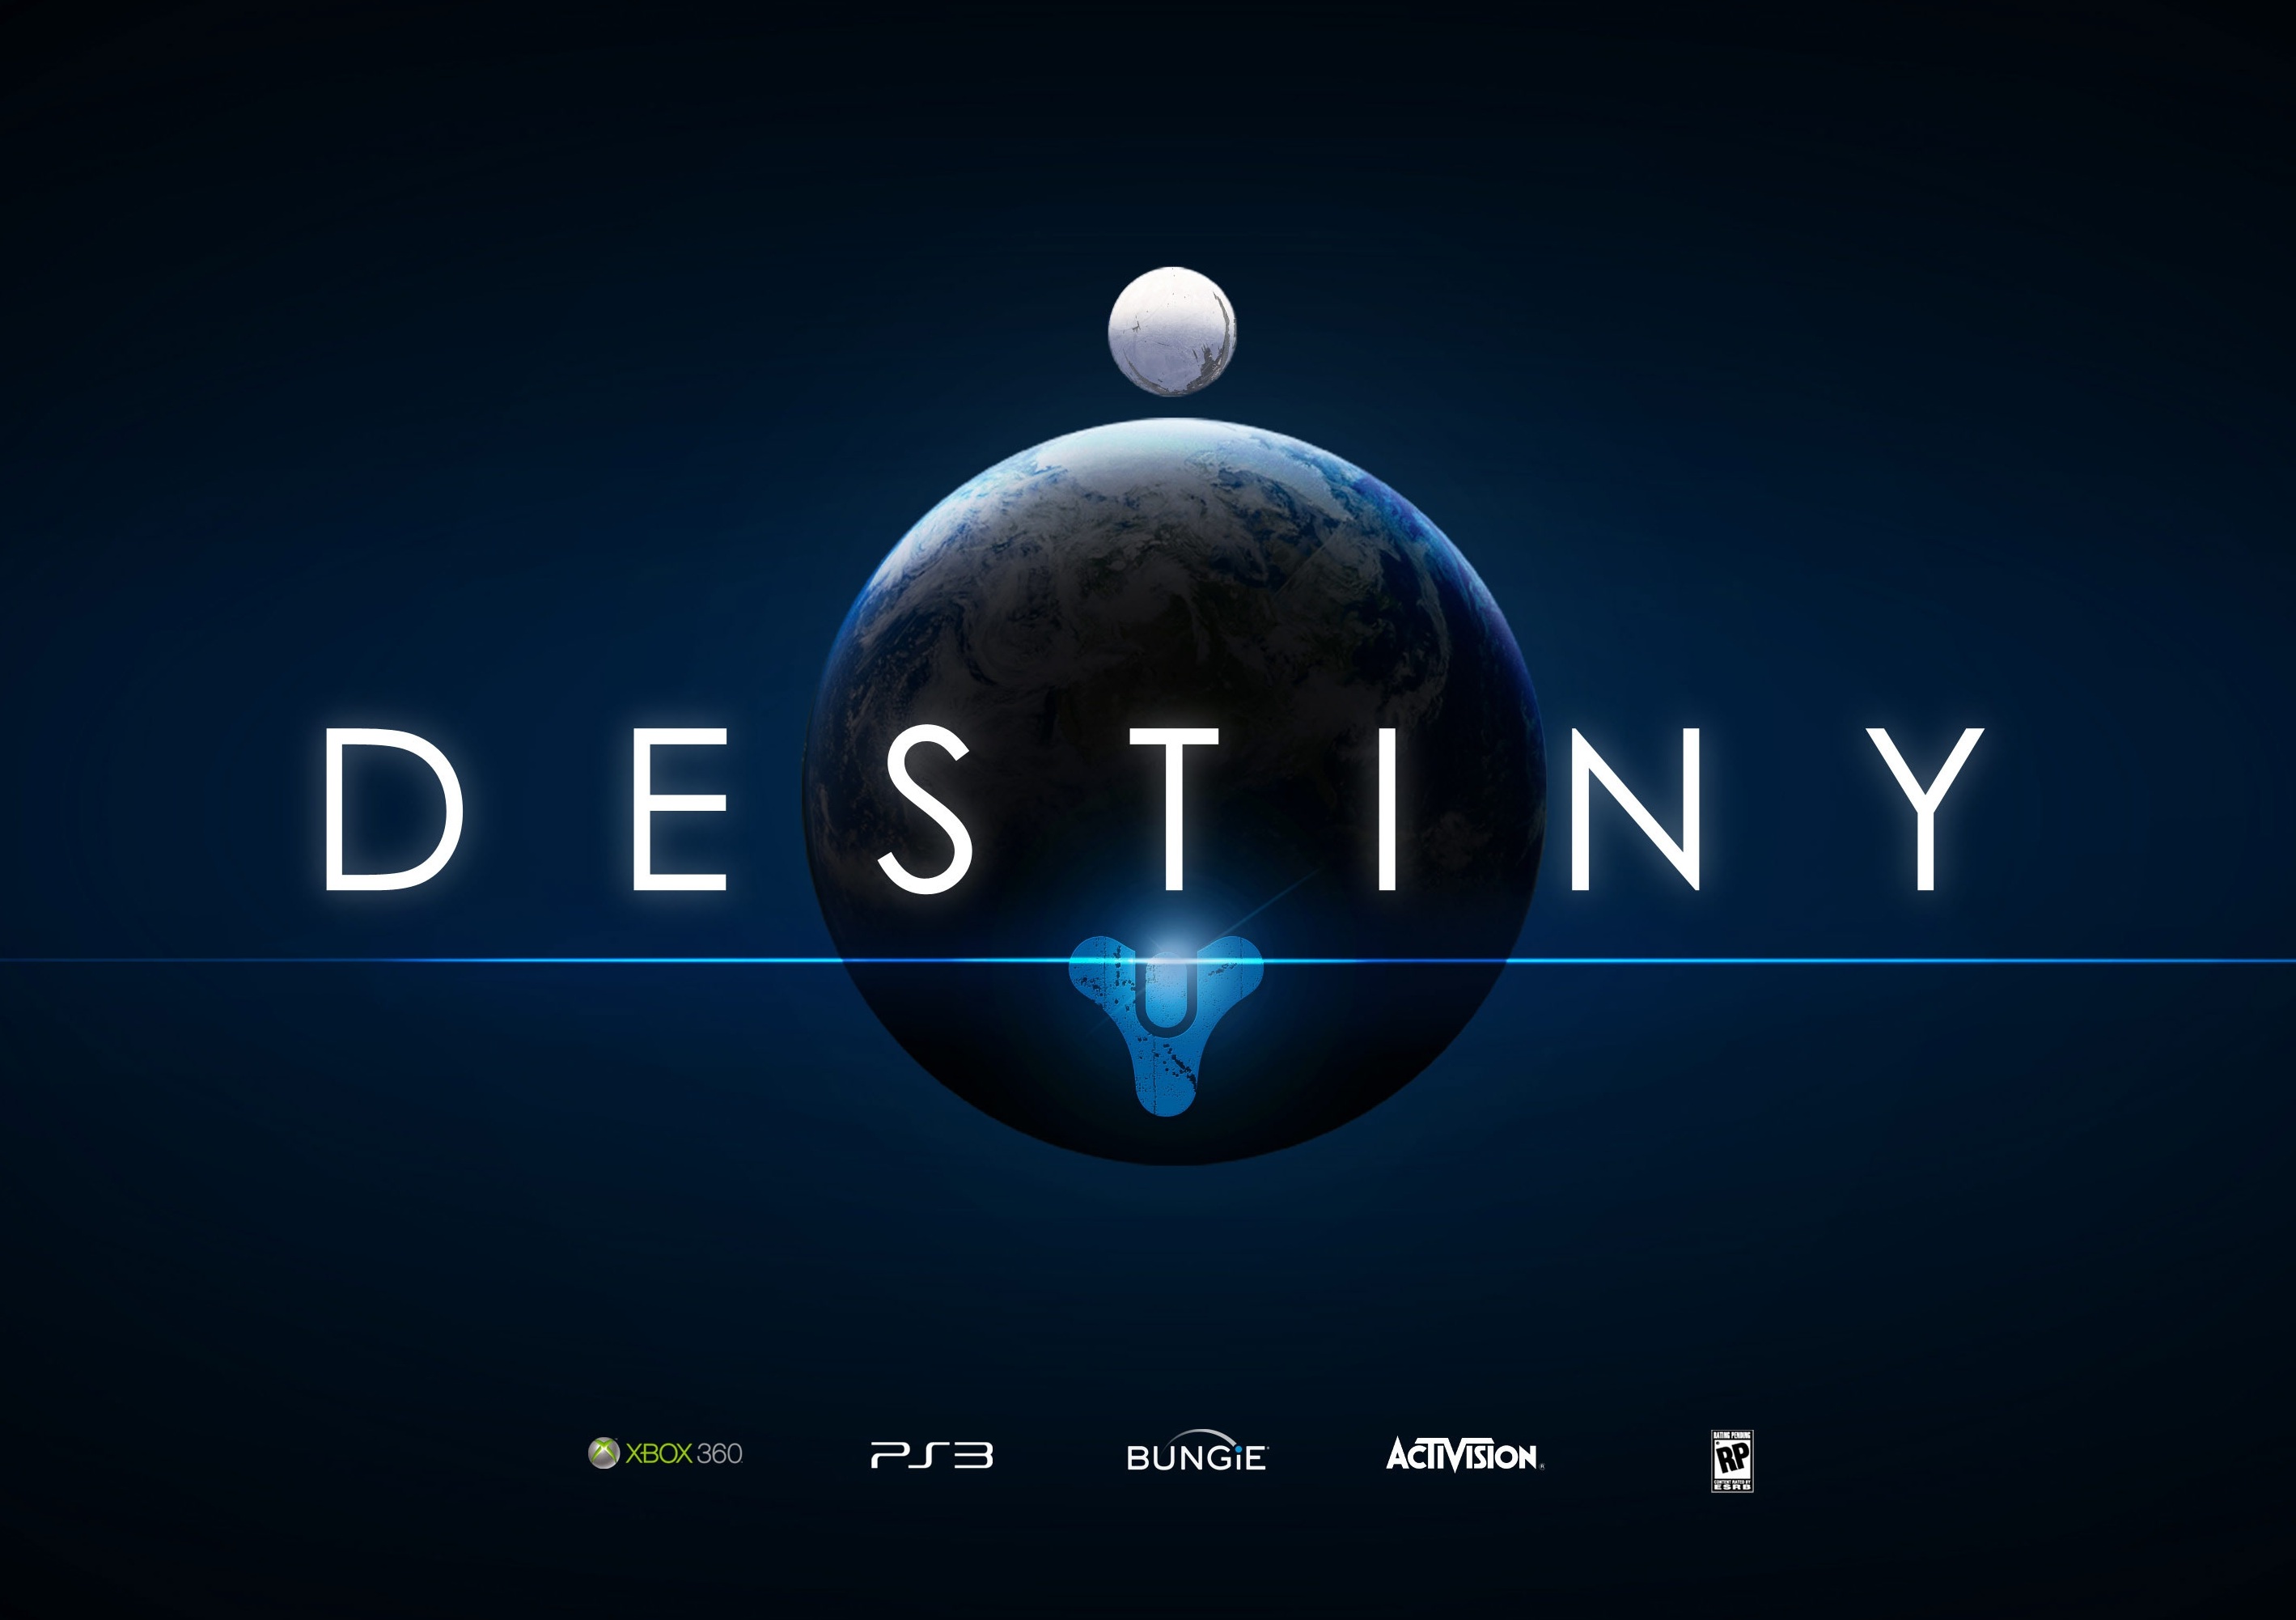 Bungie S Destiny Ing To Ps3 Story Leaked With New Image